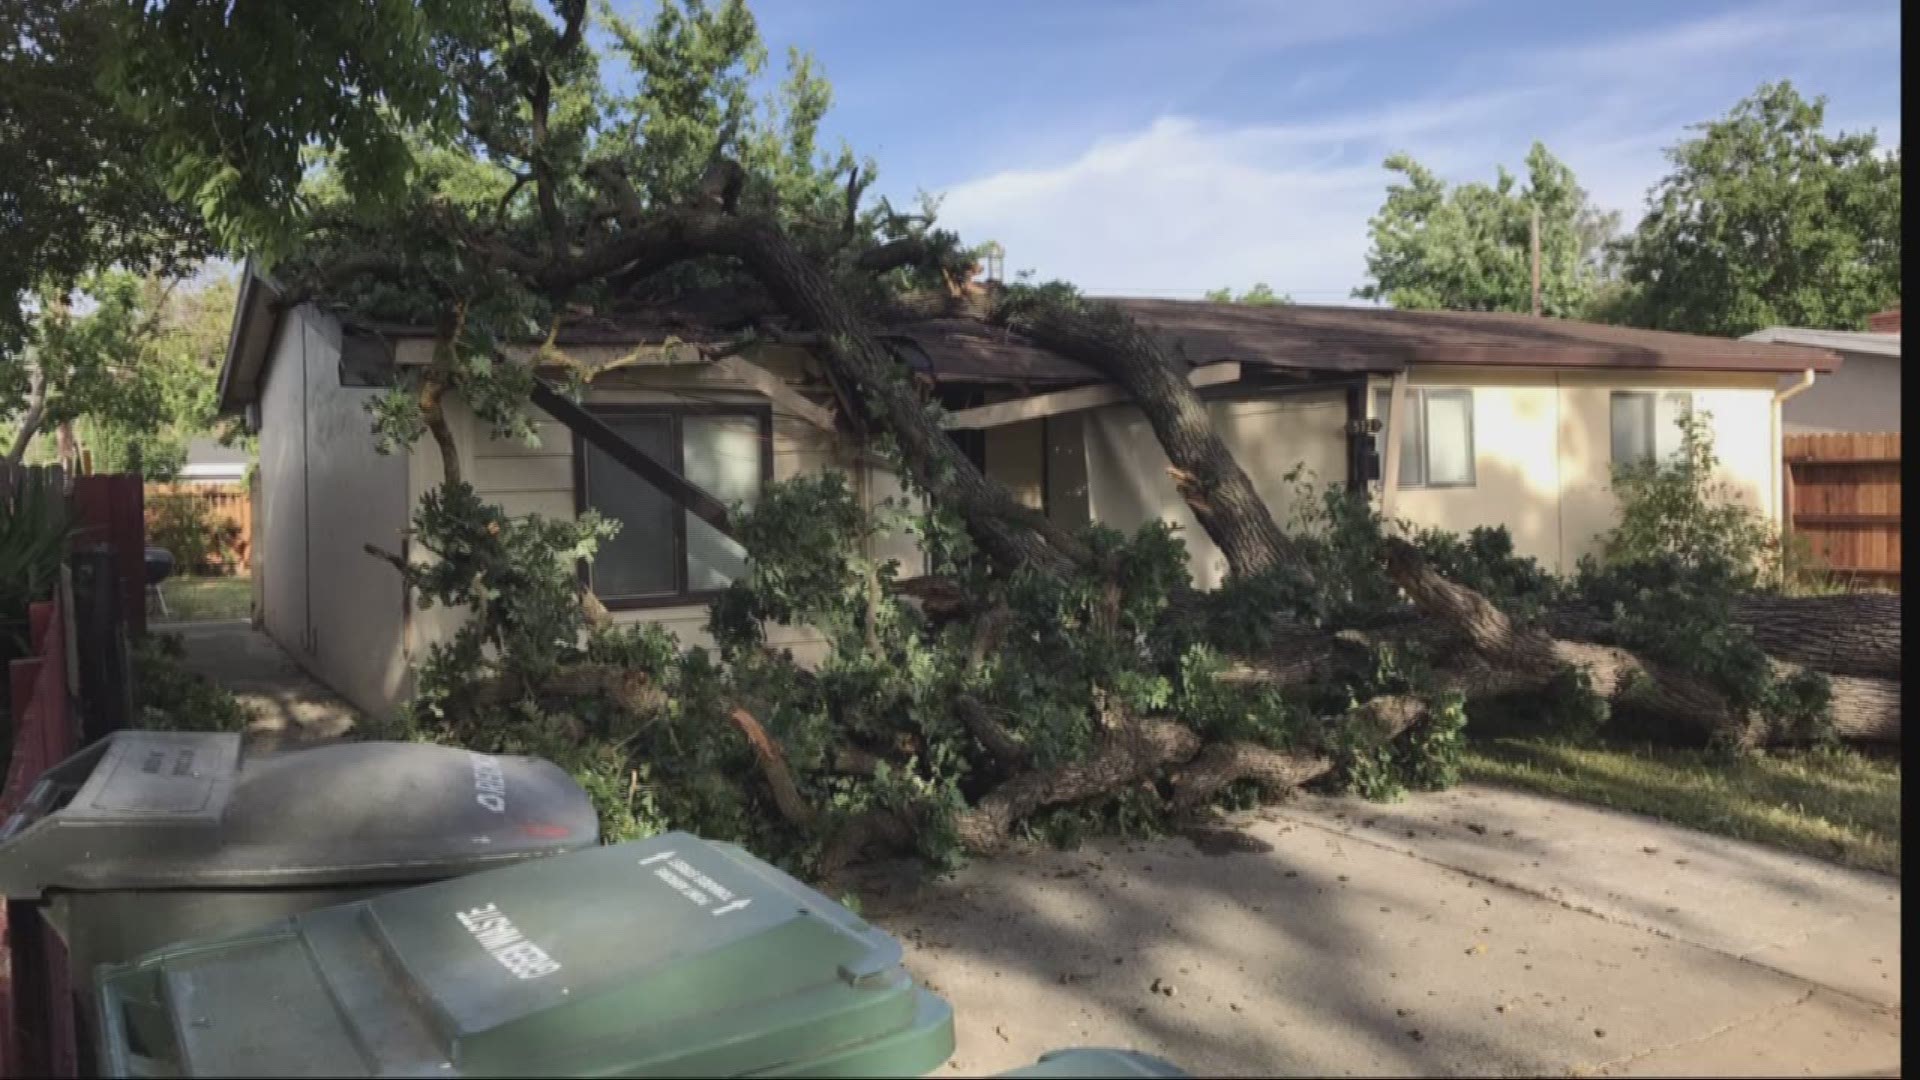 A huge tree crashed on top of a home on Mascot Avenue in South Sacramento, luckily no one inside the home was injured (May 25, 2017)